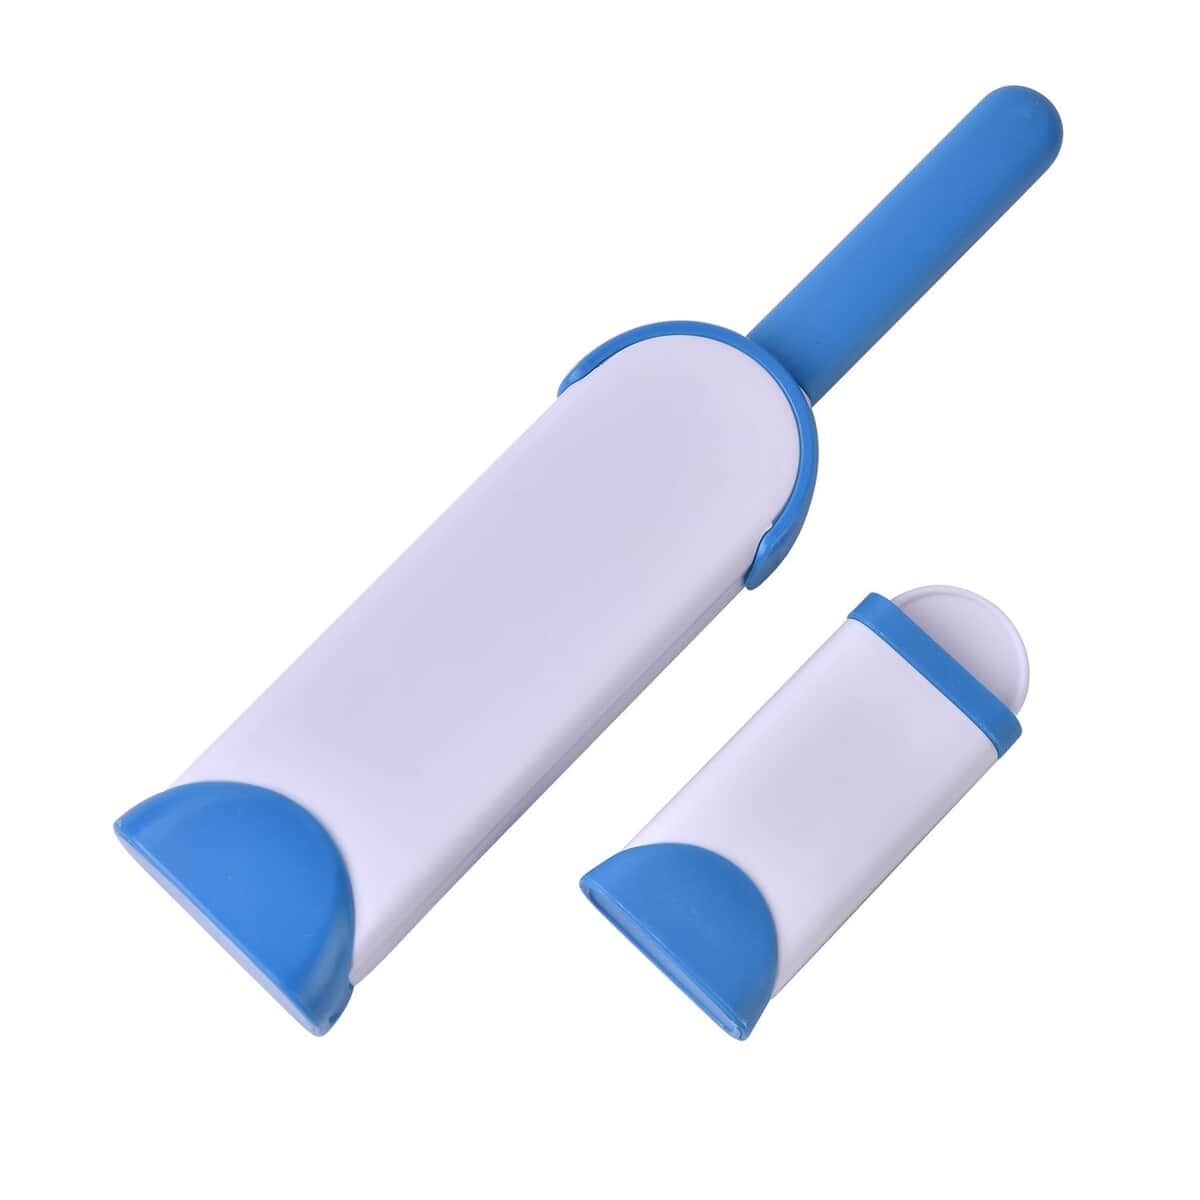 Set of 2 Blue Double Sided Cleaning Brush (3.54"x1.57"x12.6") & (2.16"x0.98"x5.51") image number 0